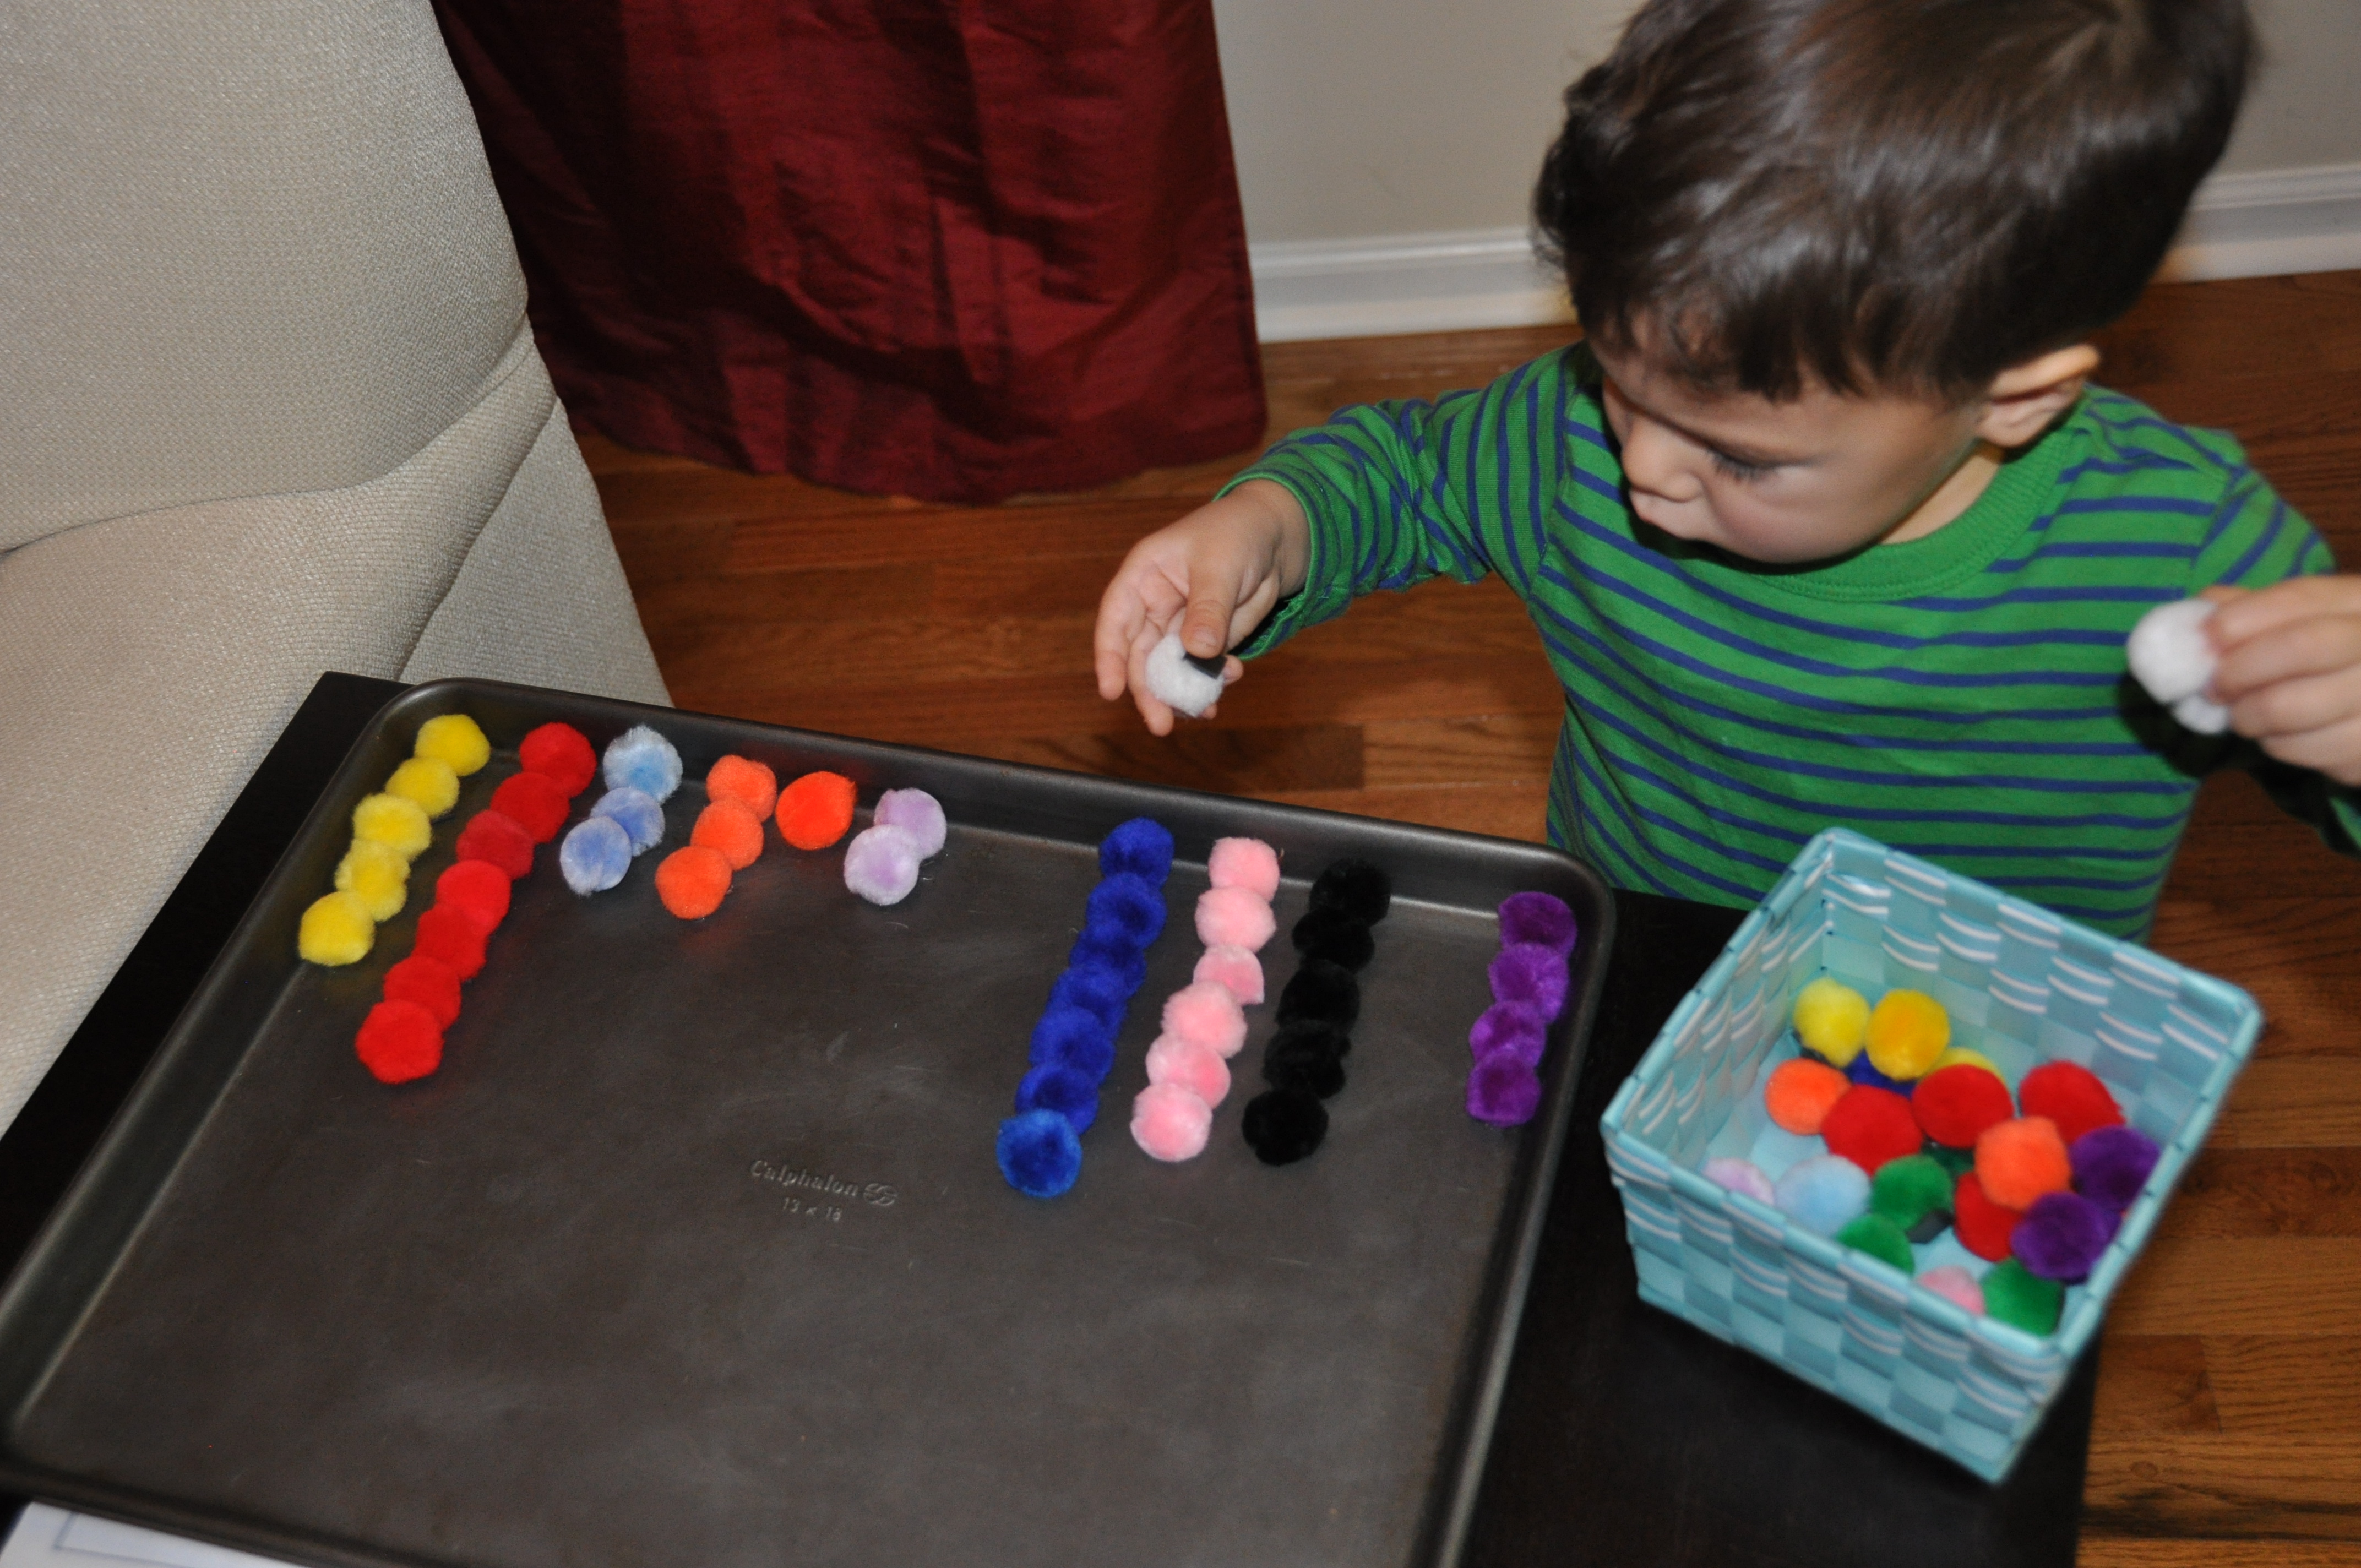 table top toys for preschoolers